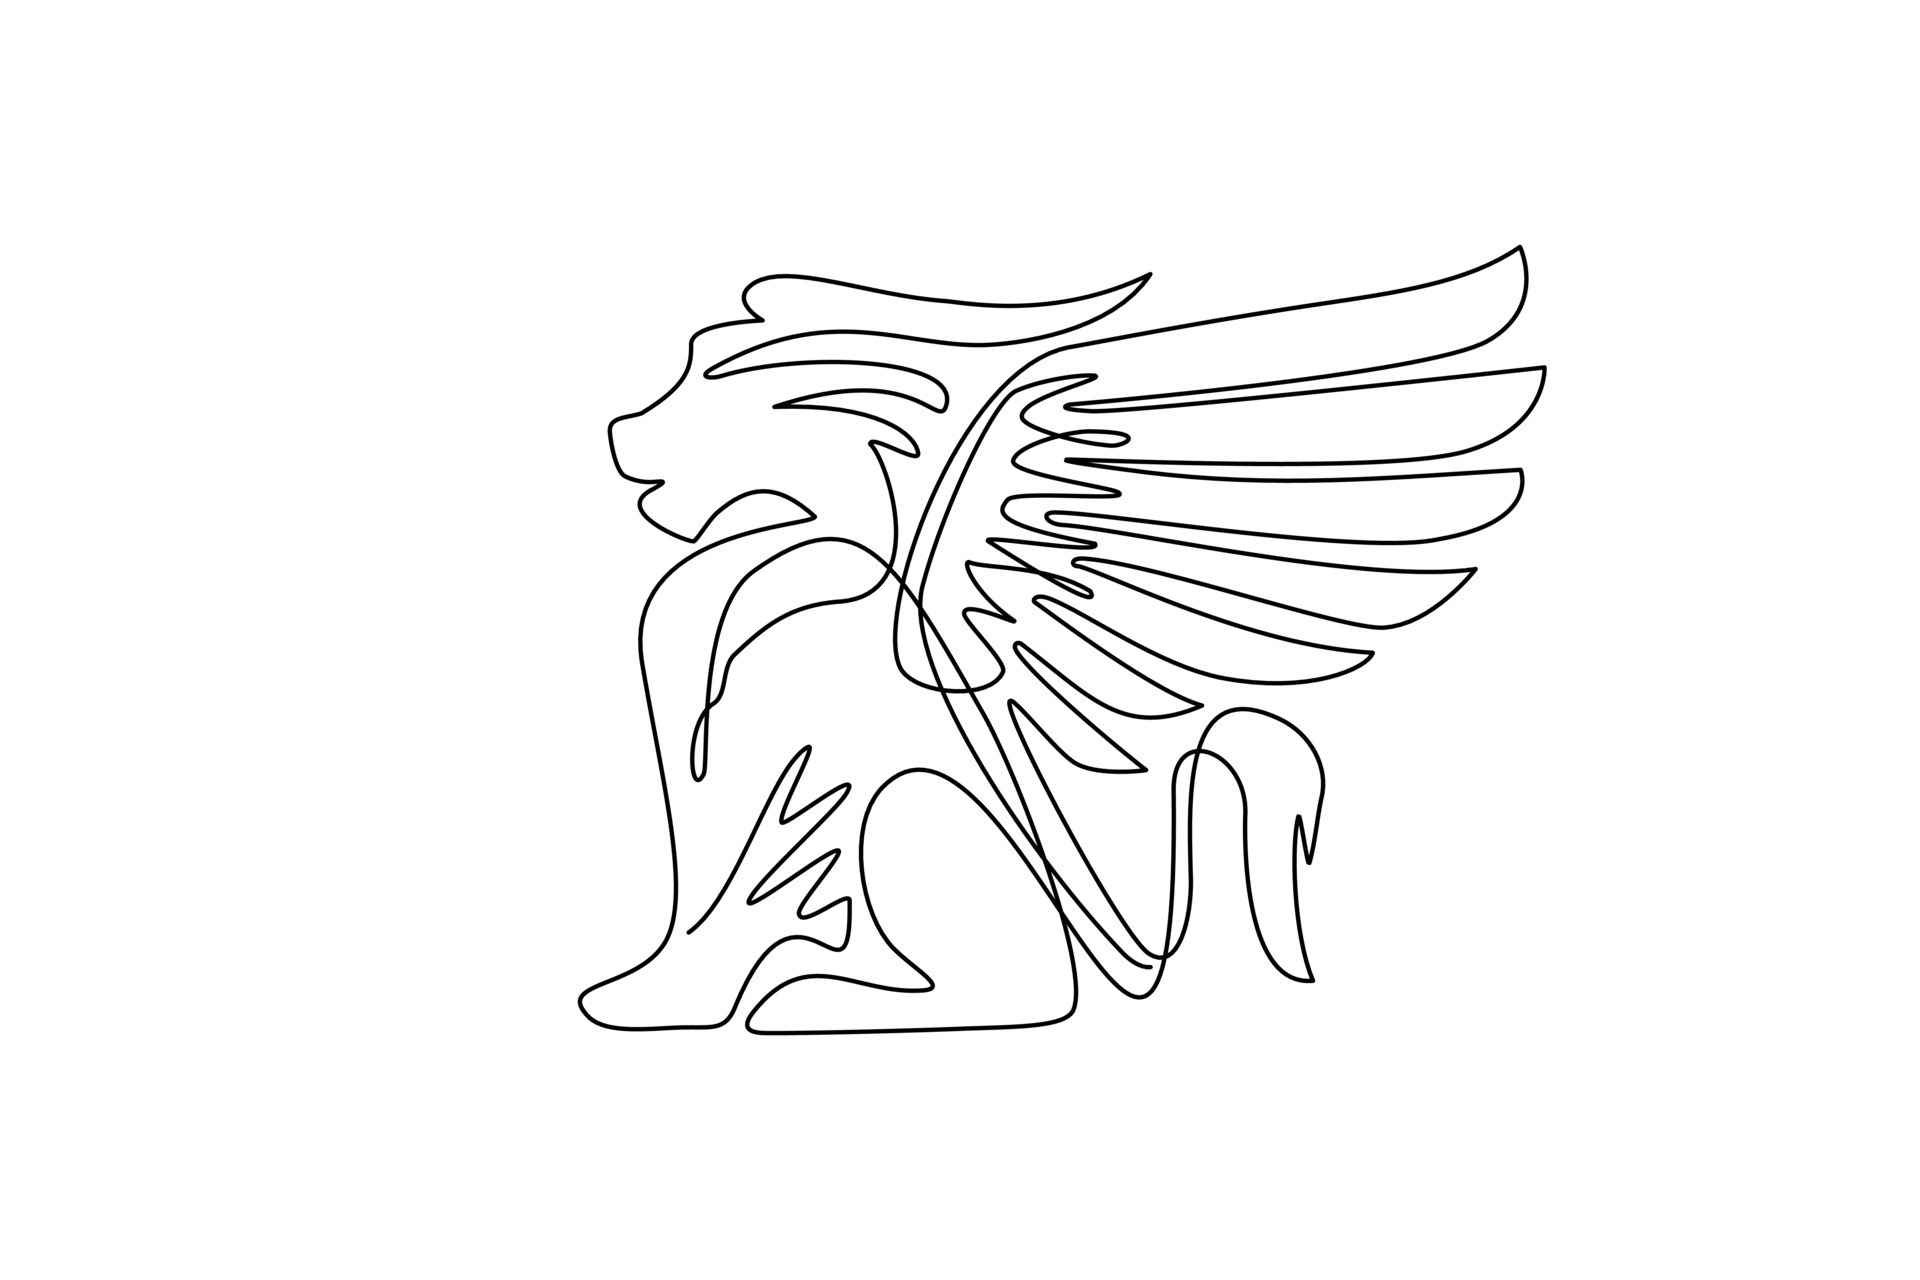 https://static.vecteezy.com/system/resources/previews/008/720/227/original/single-one-line-drawing-winged-lion-logos-fantasy-creatures-fantasy-beasts-mythical-creatures-griffin-premium-business-template-modern-continuous-line-draw-design-graphic-illustration-vector.jpg